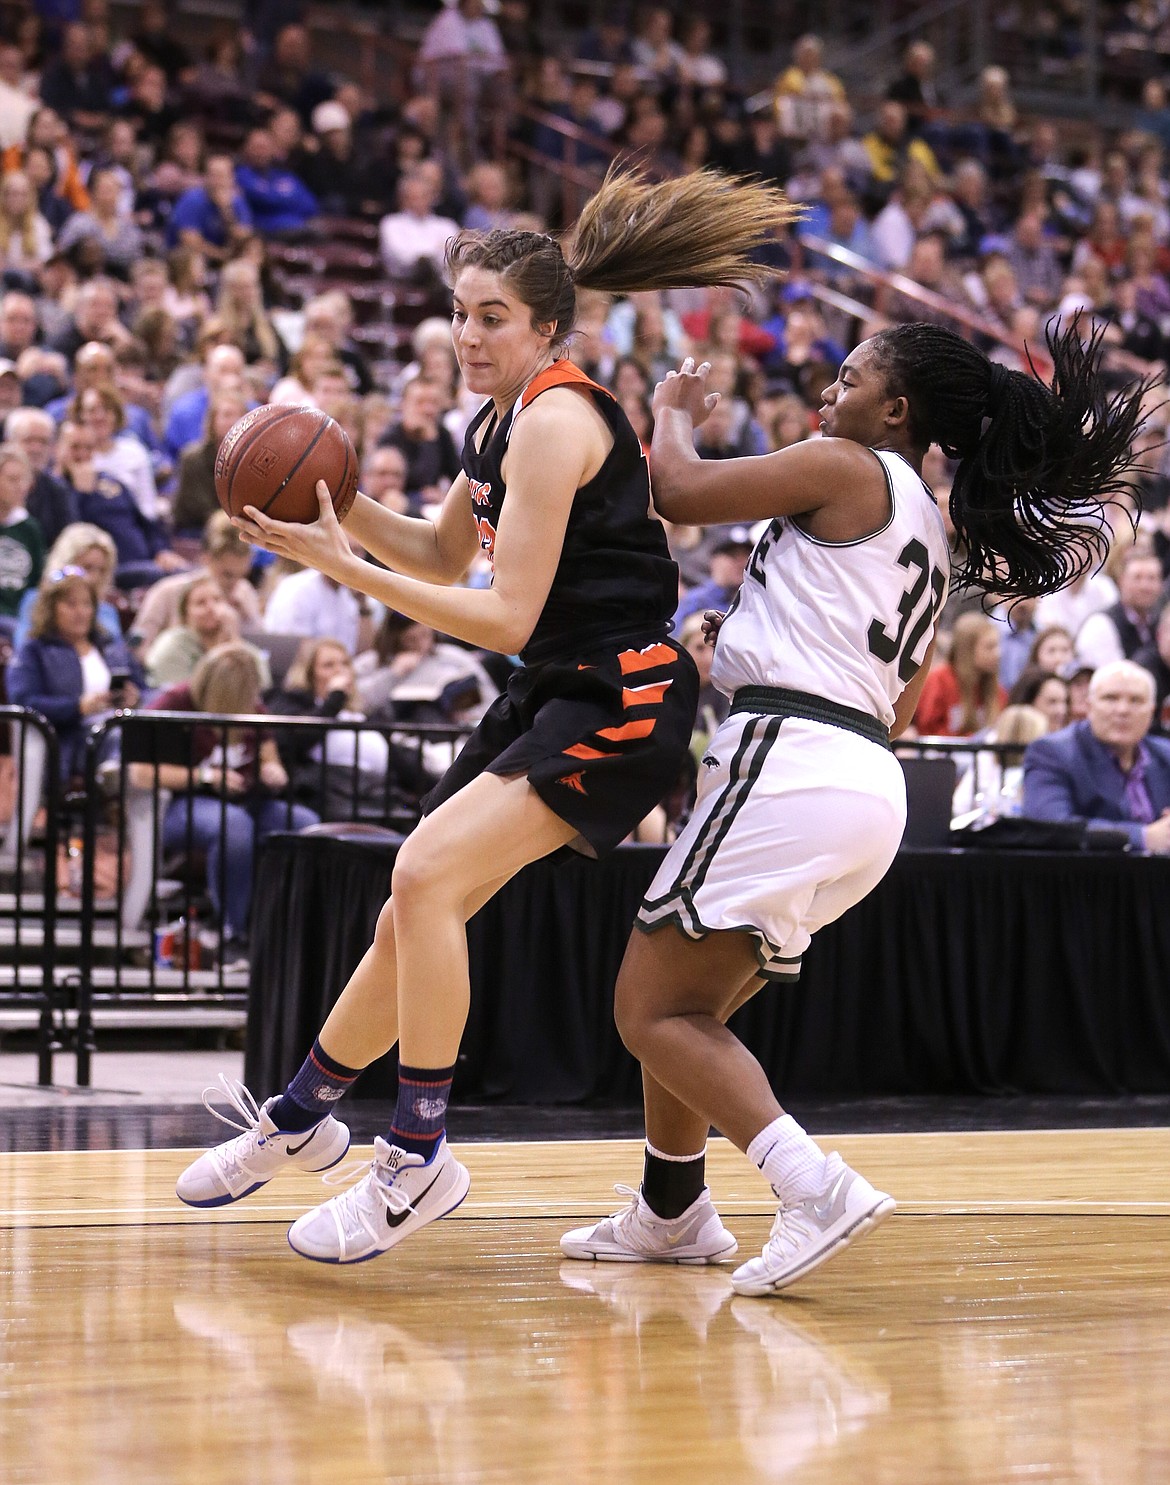 JASON DUCHOW PHOTOGRAPHY
Melody Kempton of Post Falls takes the ball to the basket against the defense of Jaimee McKinnie of Eagle during the state 5A championship game Saturday night at the Ford Idaho Center in Nampa.